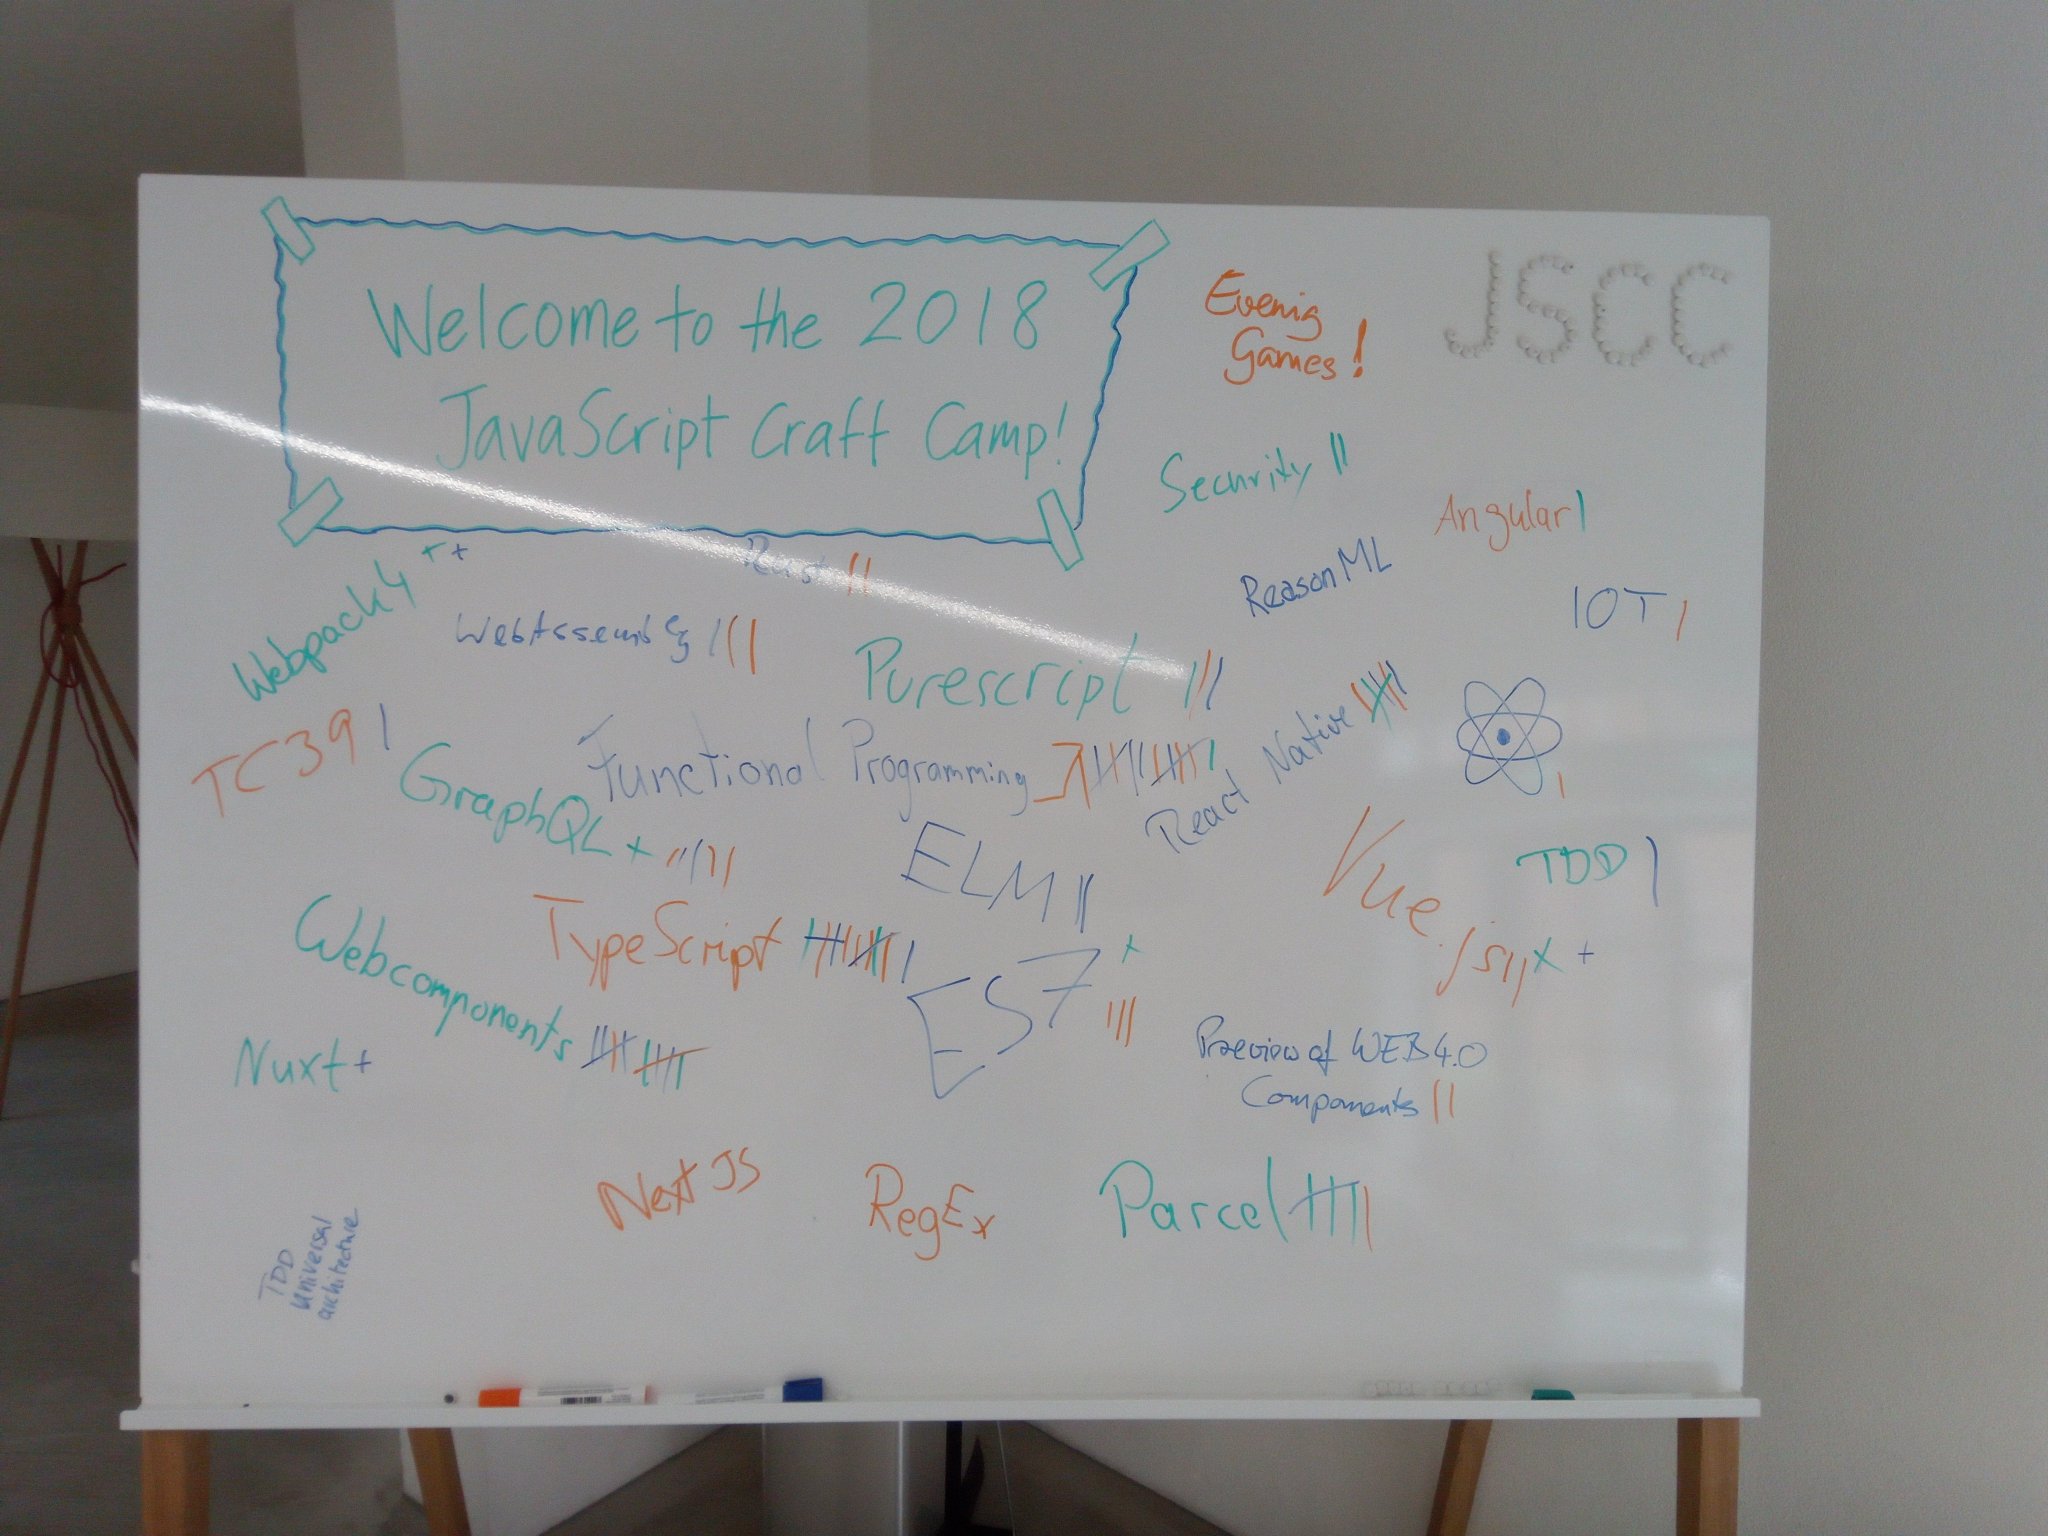 Impression 20 of 37 from JSCraftCamp 2018